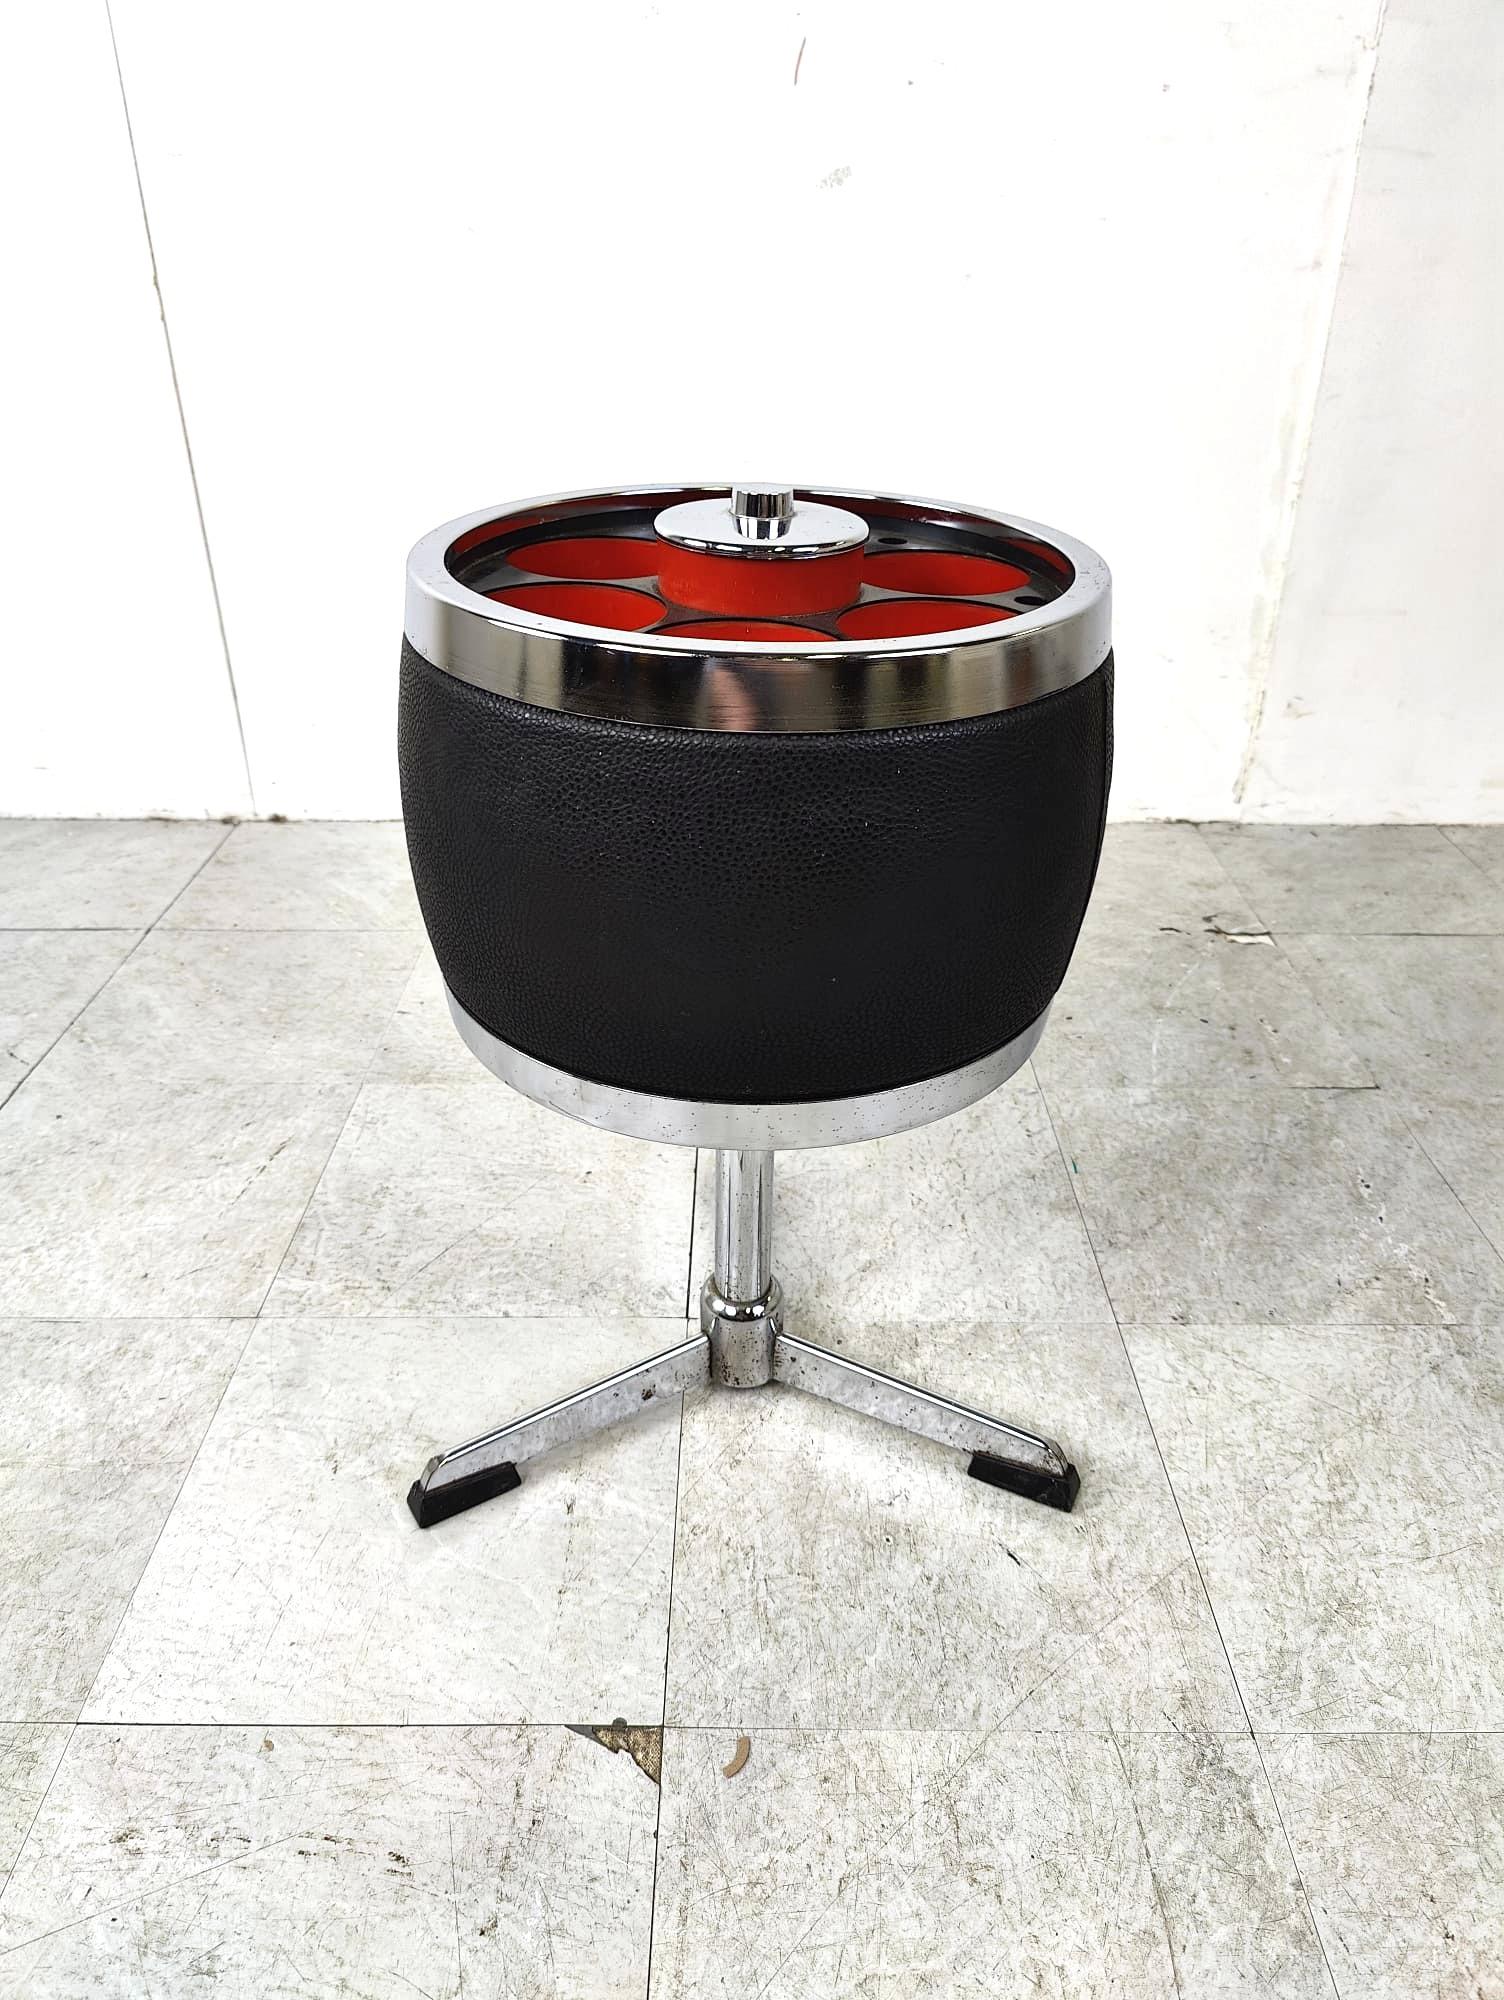 Vintage space age bottle holder side table with an organe and black plastic top and chromed base.

Cool decorative piece.

1960s - Belgium

Good overall condition

Dimensions:
Height: 56cm
Diameter: 40cm

Ref.: 526322